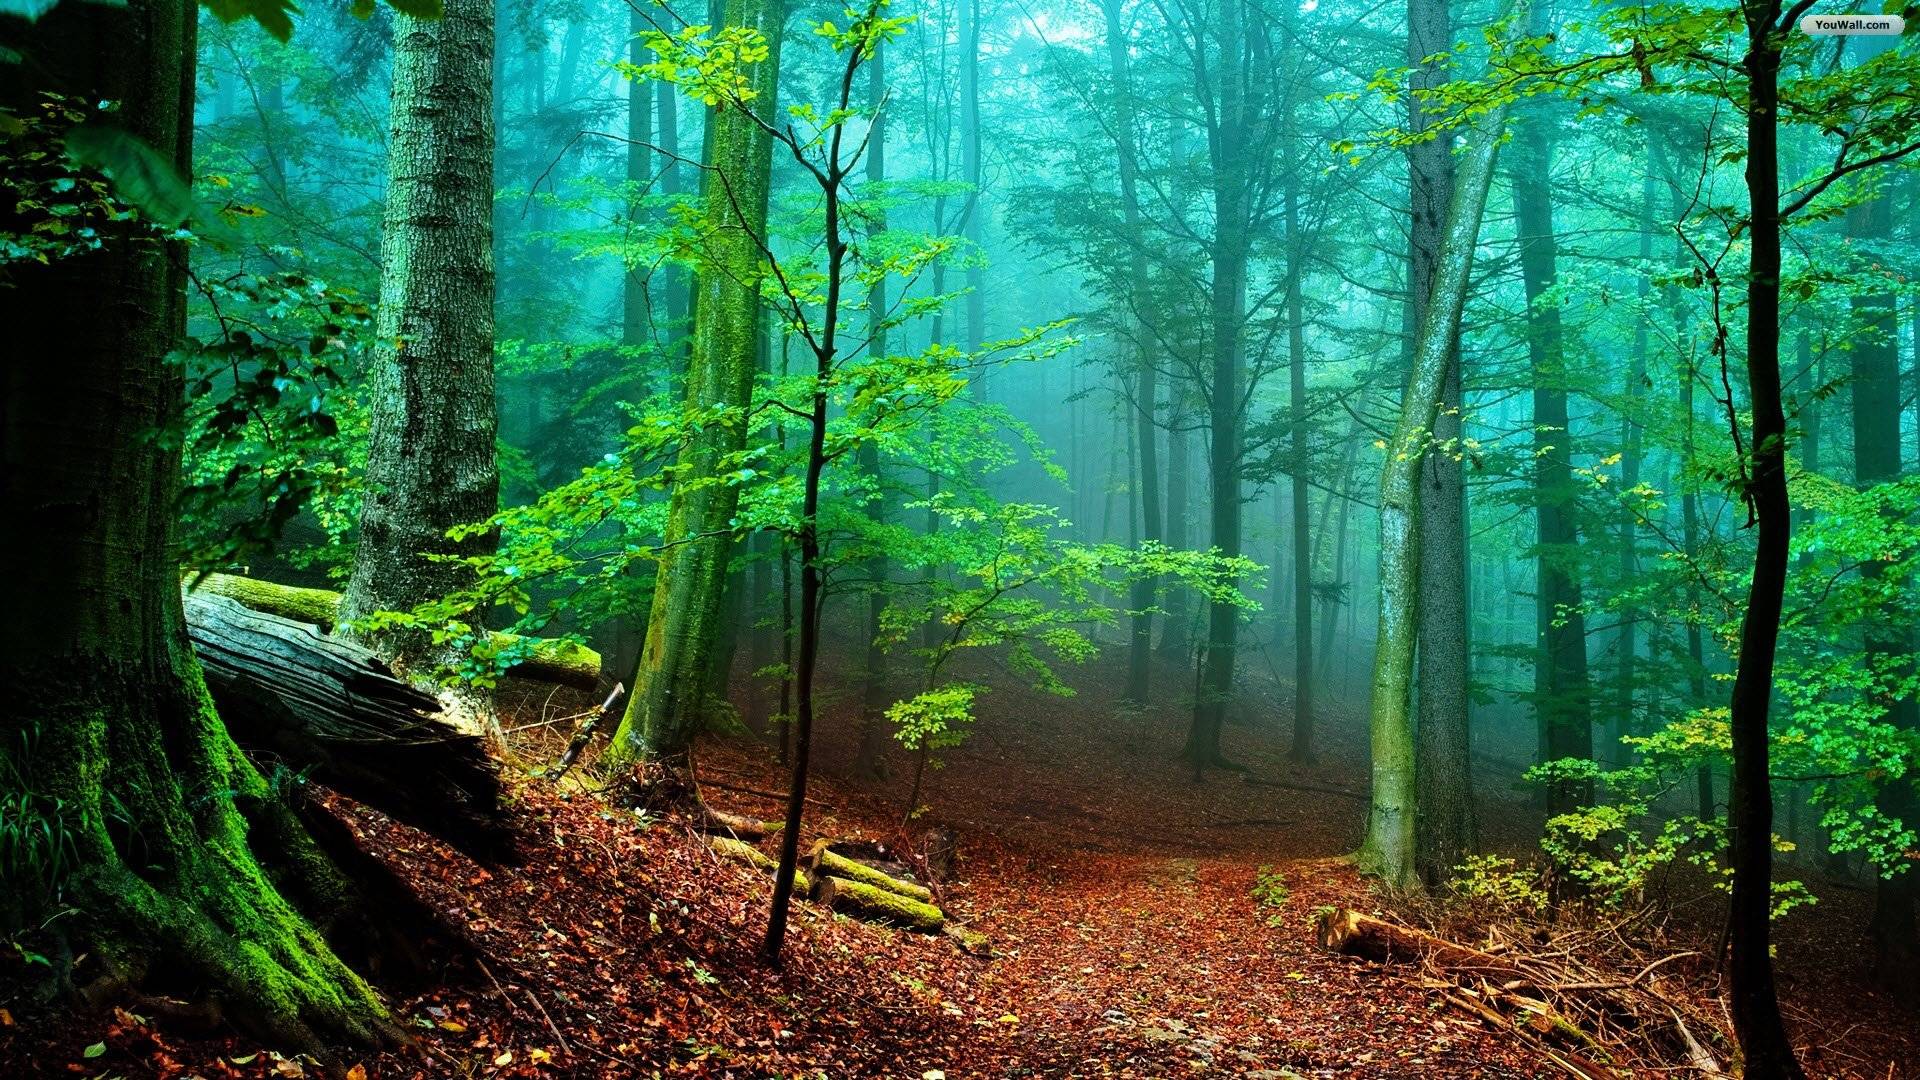 Hd Wallpaper Nature Forest Widescreen 2 HD Wallpaper. Hdimges